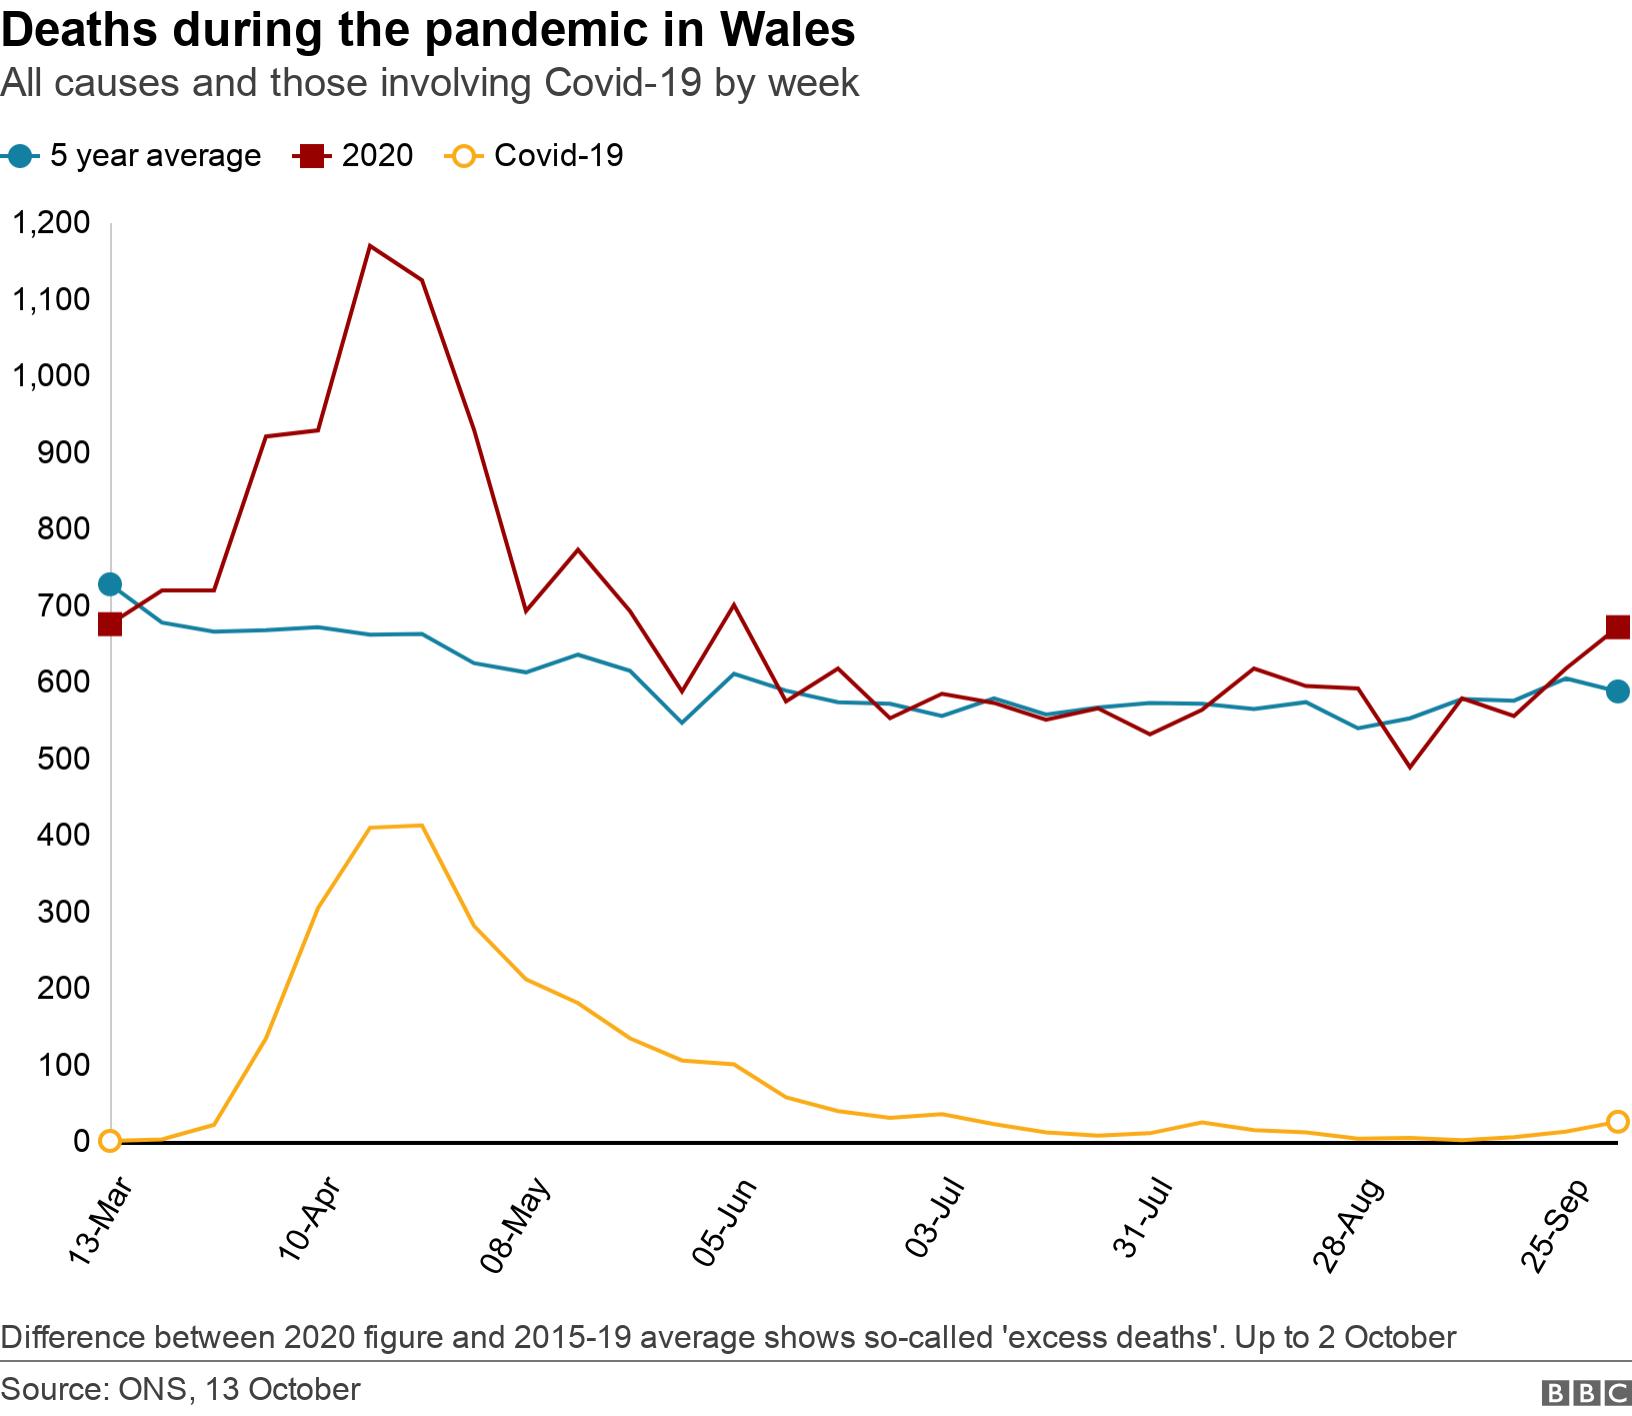 Deaths during the pandemic in Wales. All causes and those involving Covid-19 by week. Difference between 2020 figure and 2015-19 average shows so-called &#39;excess deaths&#39;. Up to 2 October.